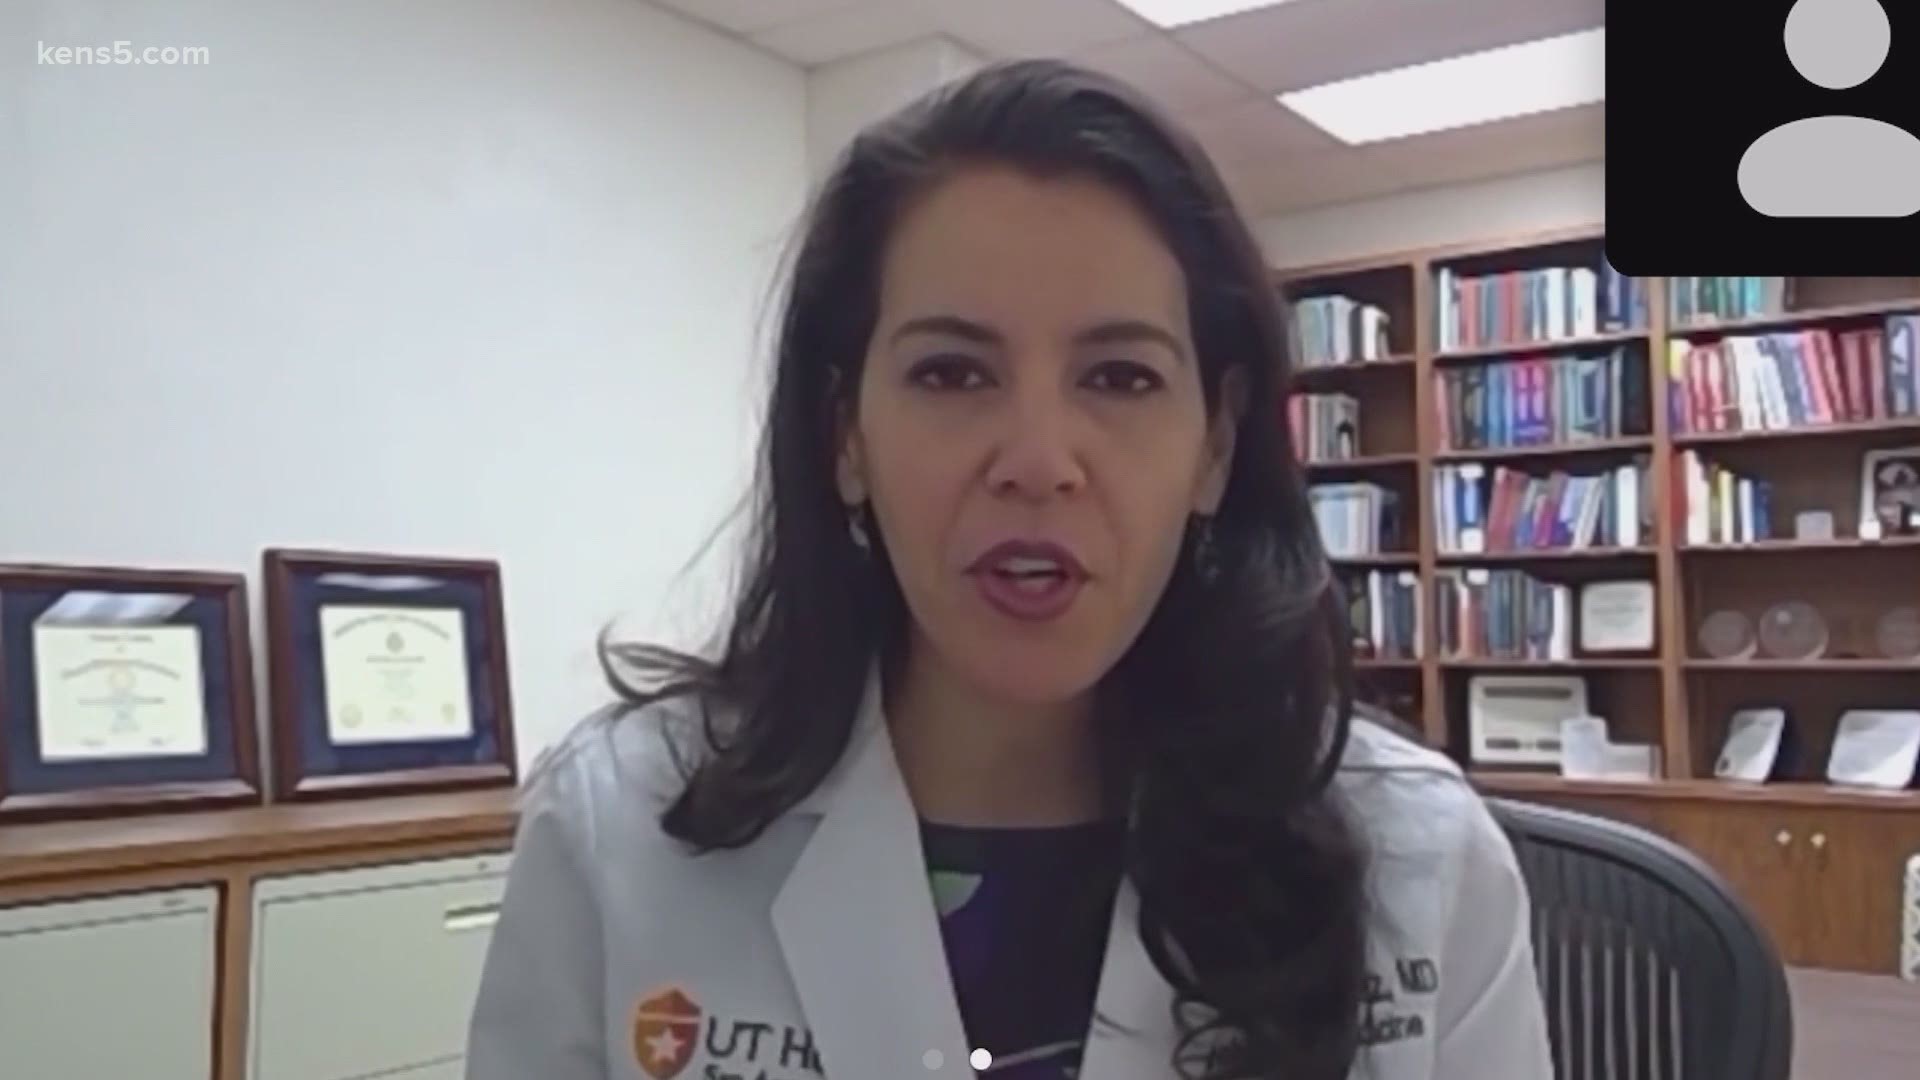 "We've saved your life, now we need to save your quality of life," Dr. Monica Verduzco-Gutierrez said.